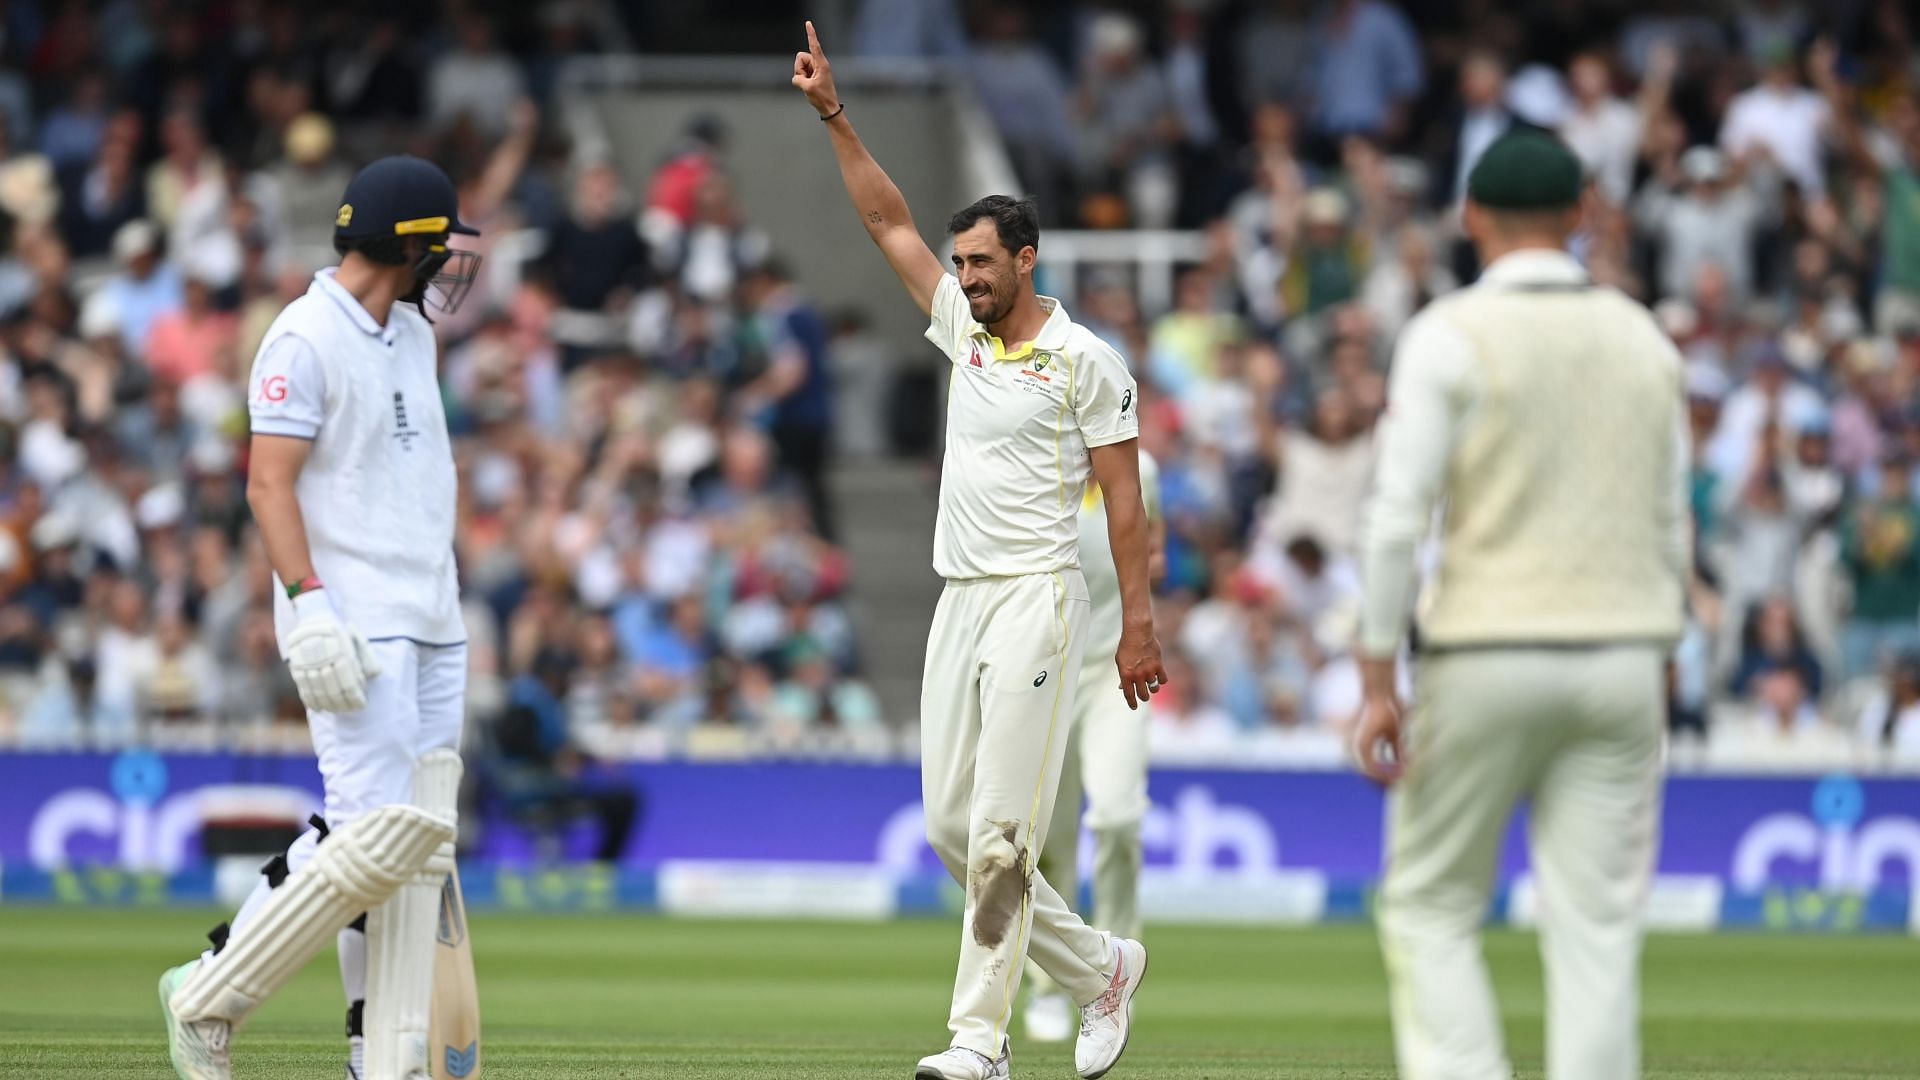 Mitchell Starc picked up some crucial wickets in the 2nd Ashes Test for the Aussies.